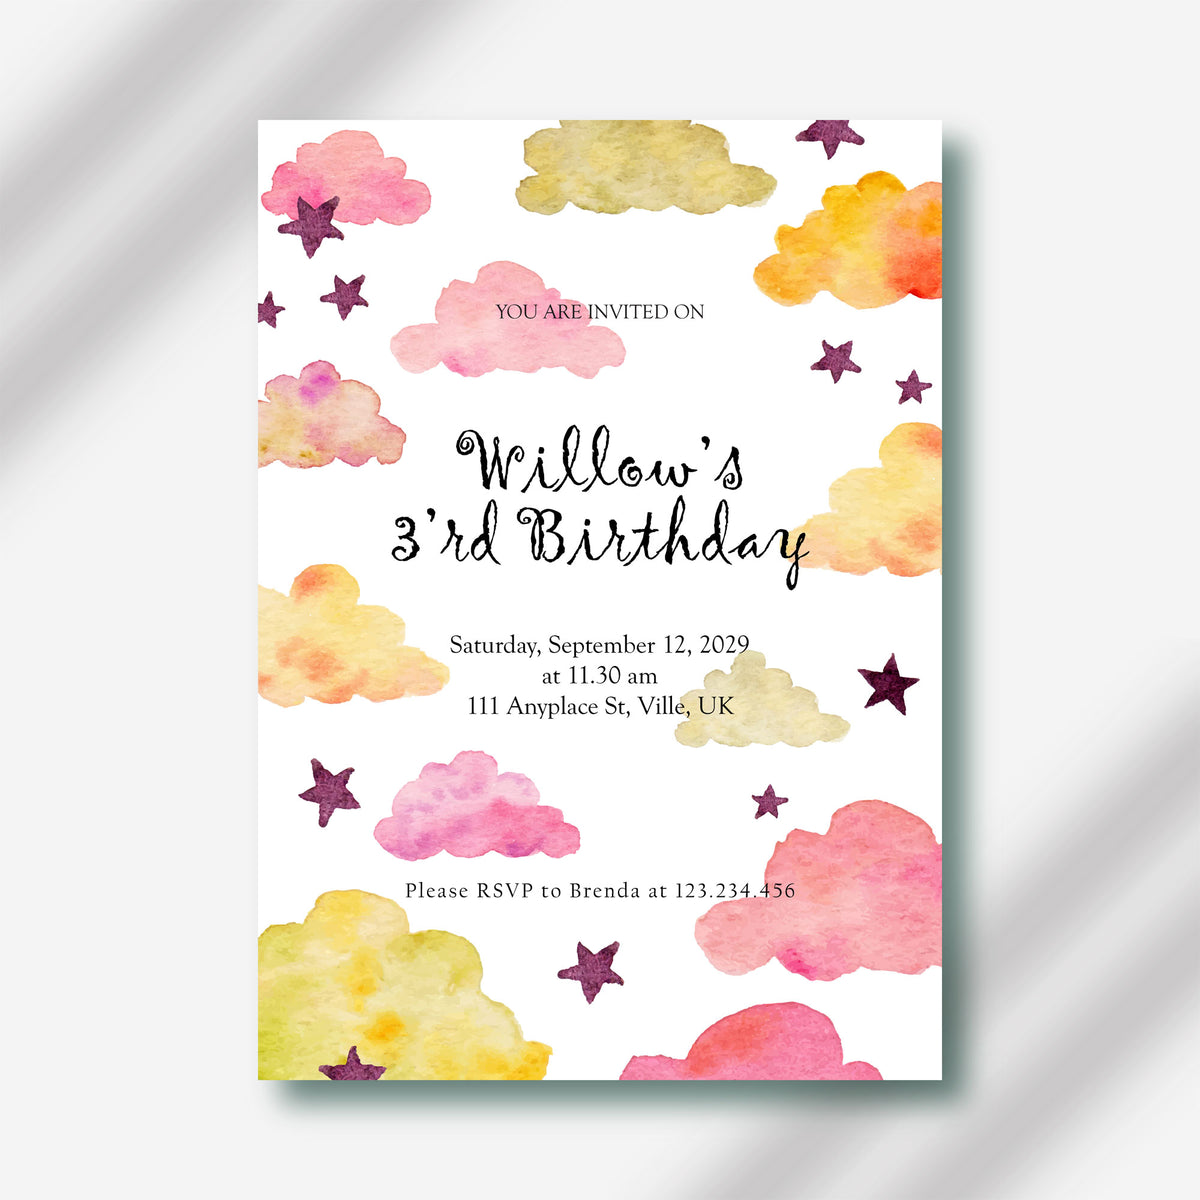 Plantable Stars & Clouds Birthday Party Invitation Card